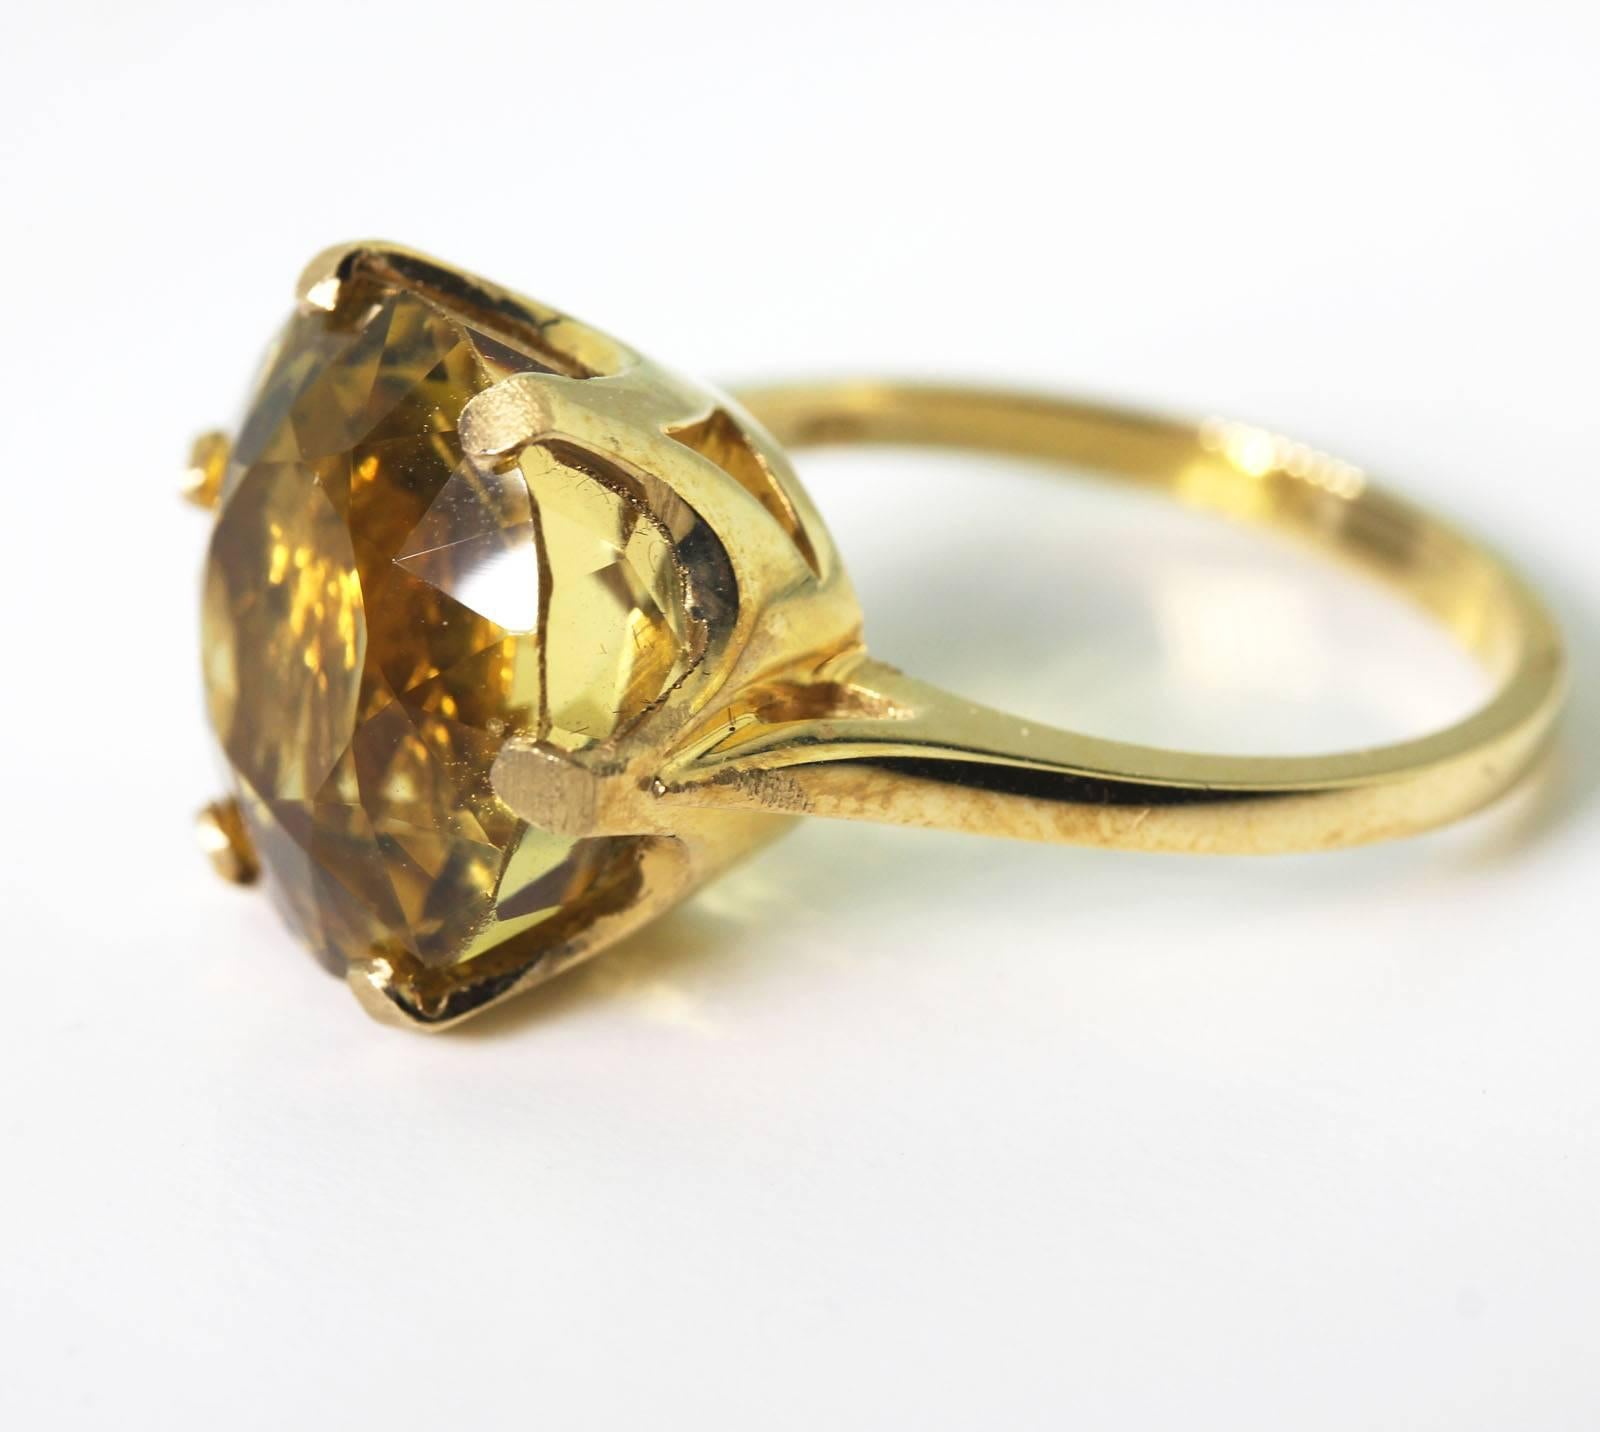 Set in 14 Kt yellow gold ring this beautiful glittering 9 carat yellow Citrine flashes glints of gold in the light.  The ring is a size 7 (sizable).